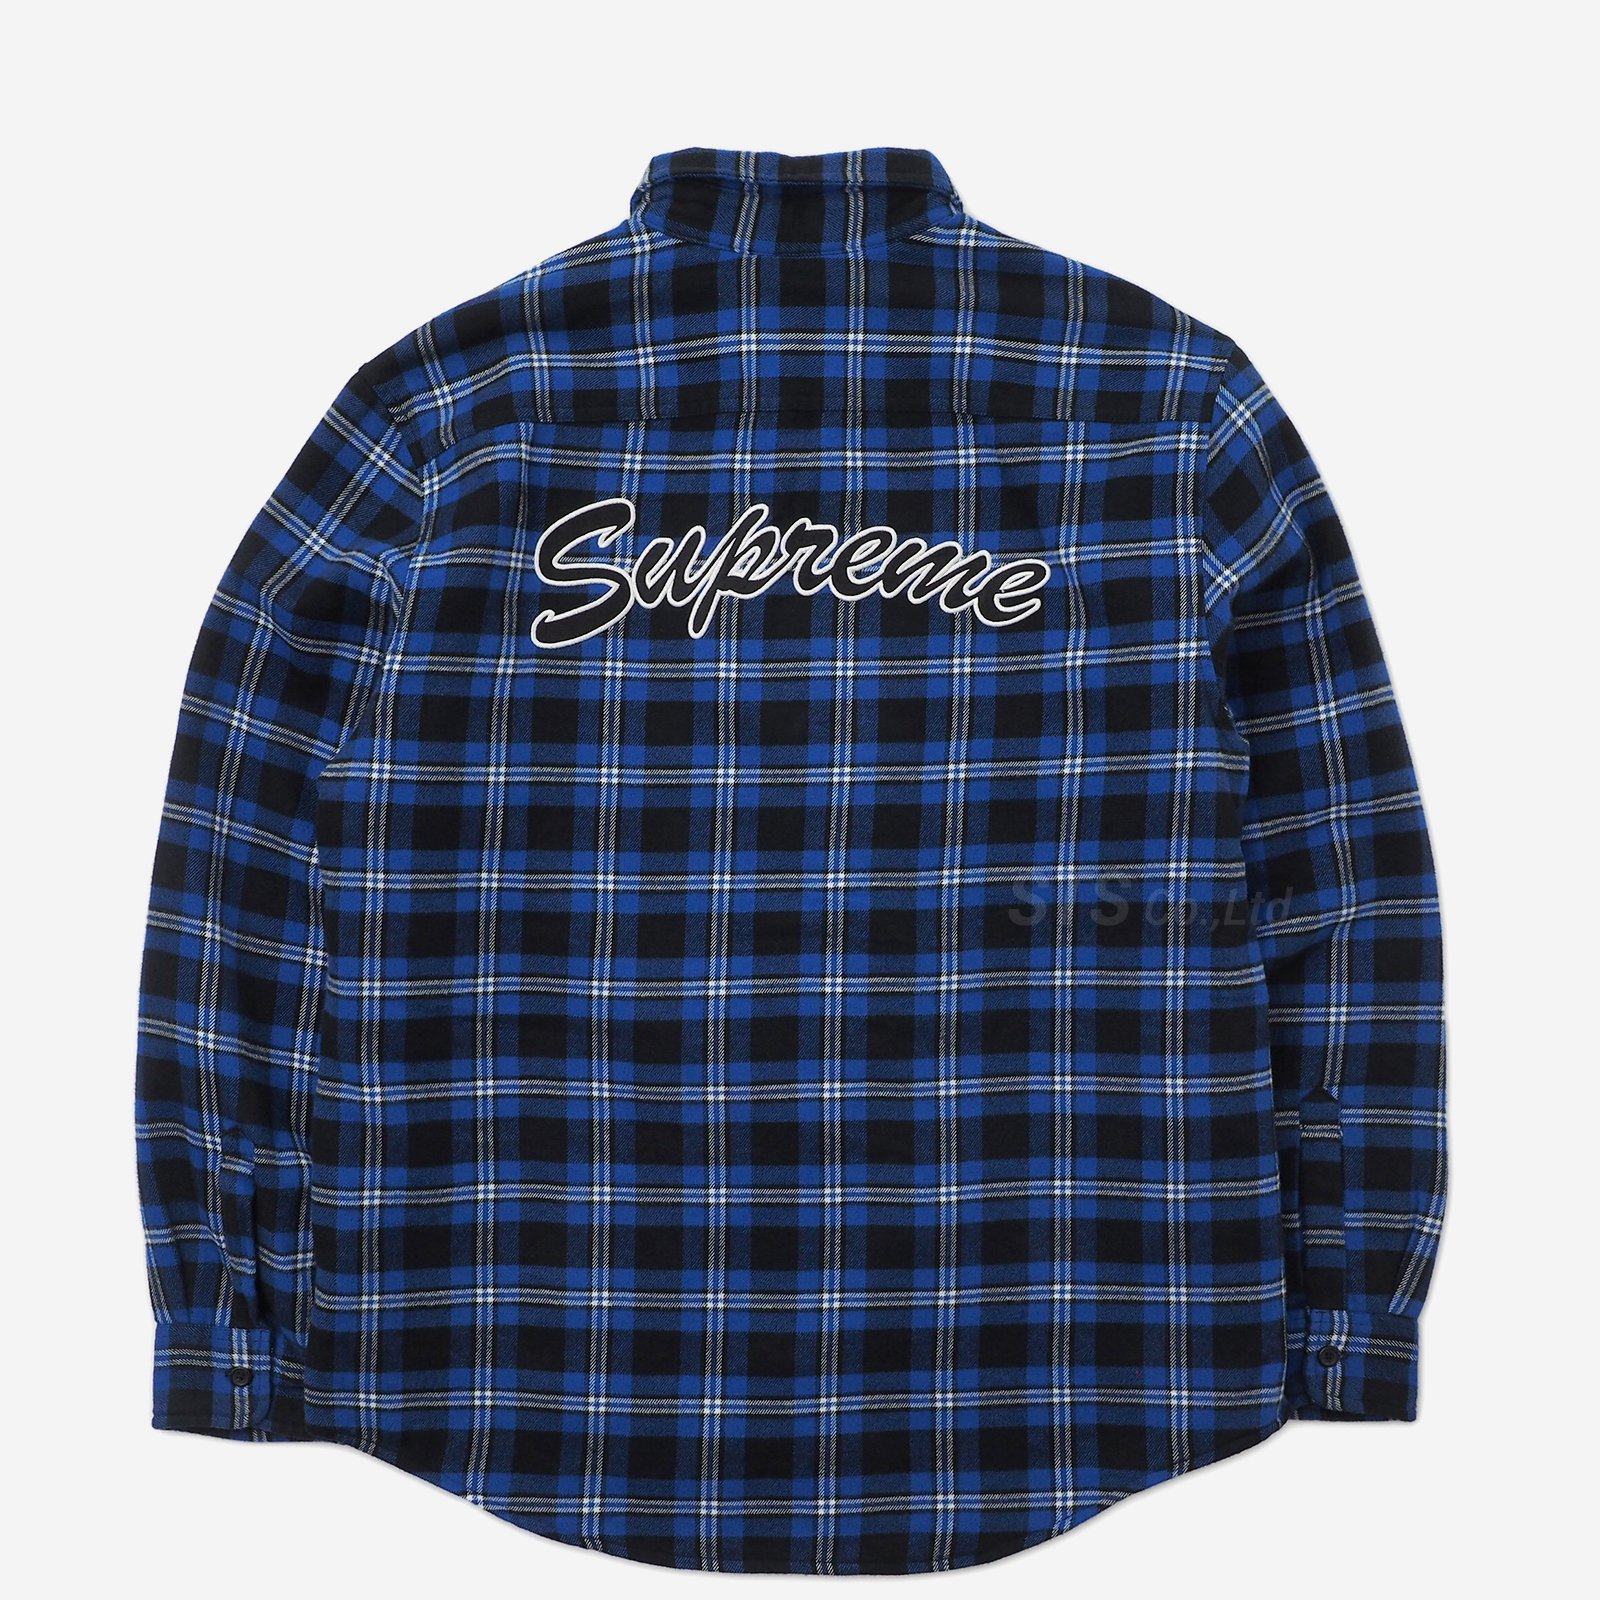 RedSIZEsupreme Quilted Flannel Shirt Sサイズ 02 - シャツ